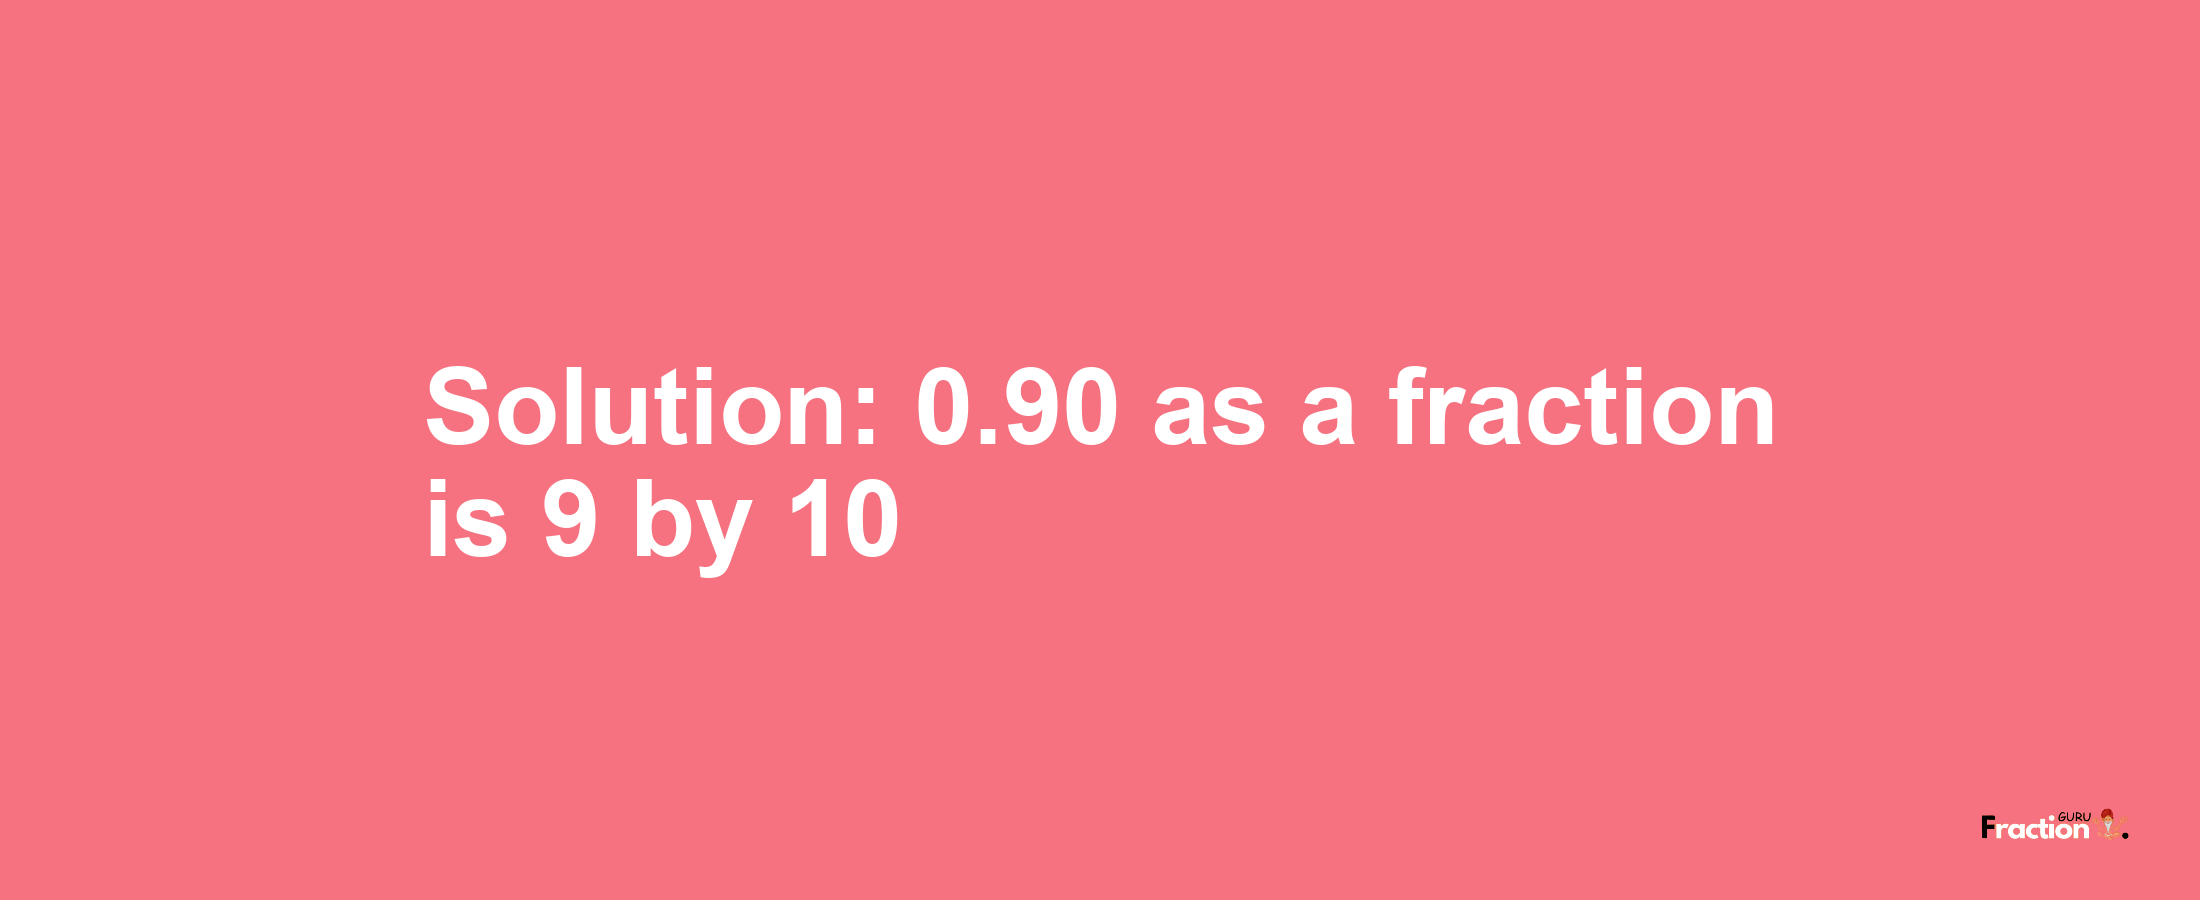 Solution:0.90 as a fraction is 9/10